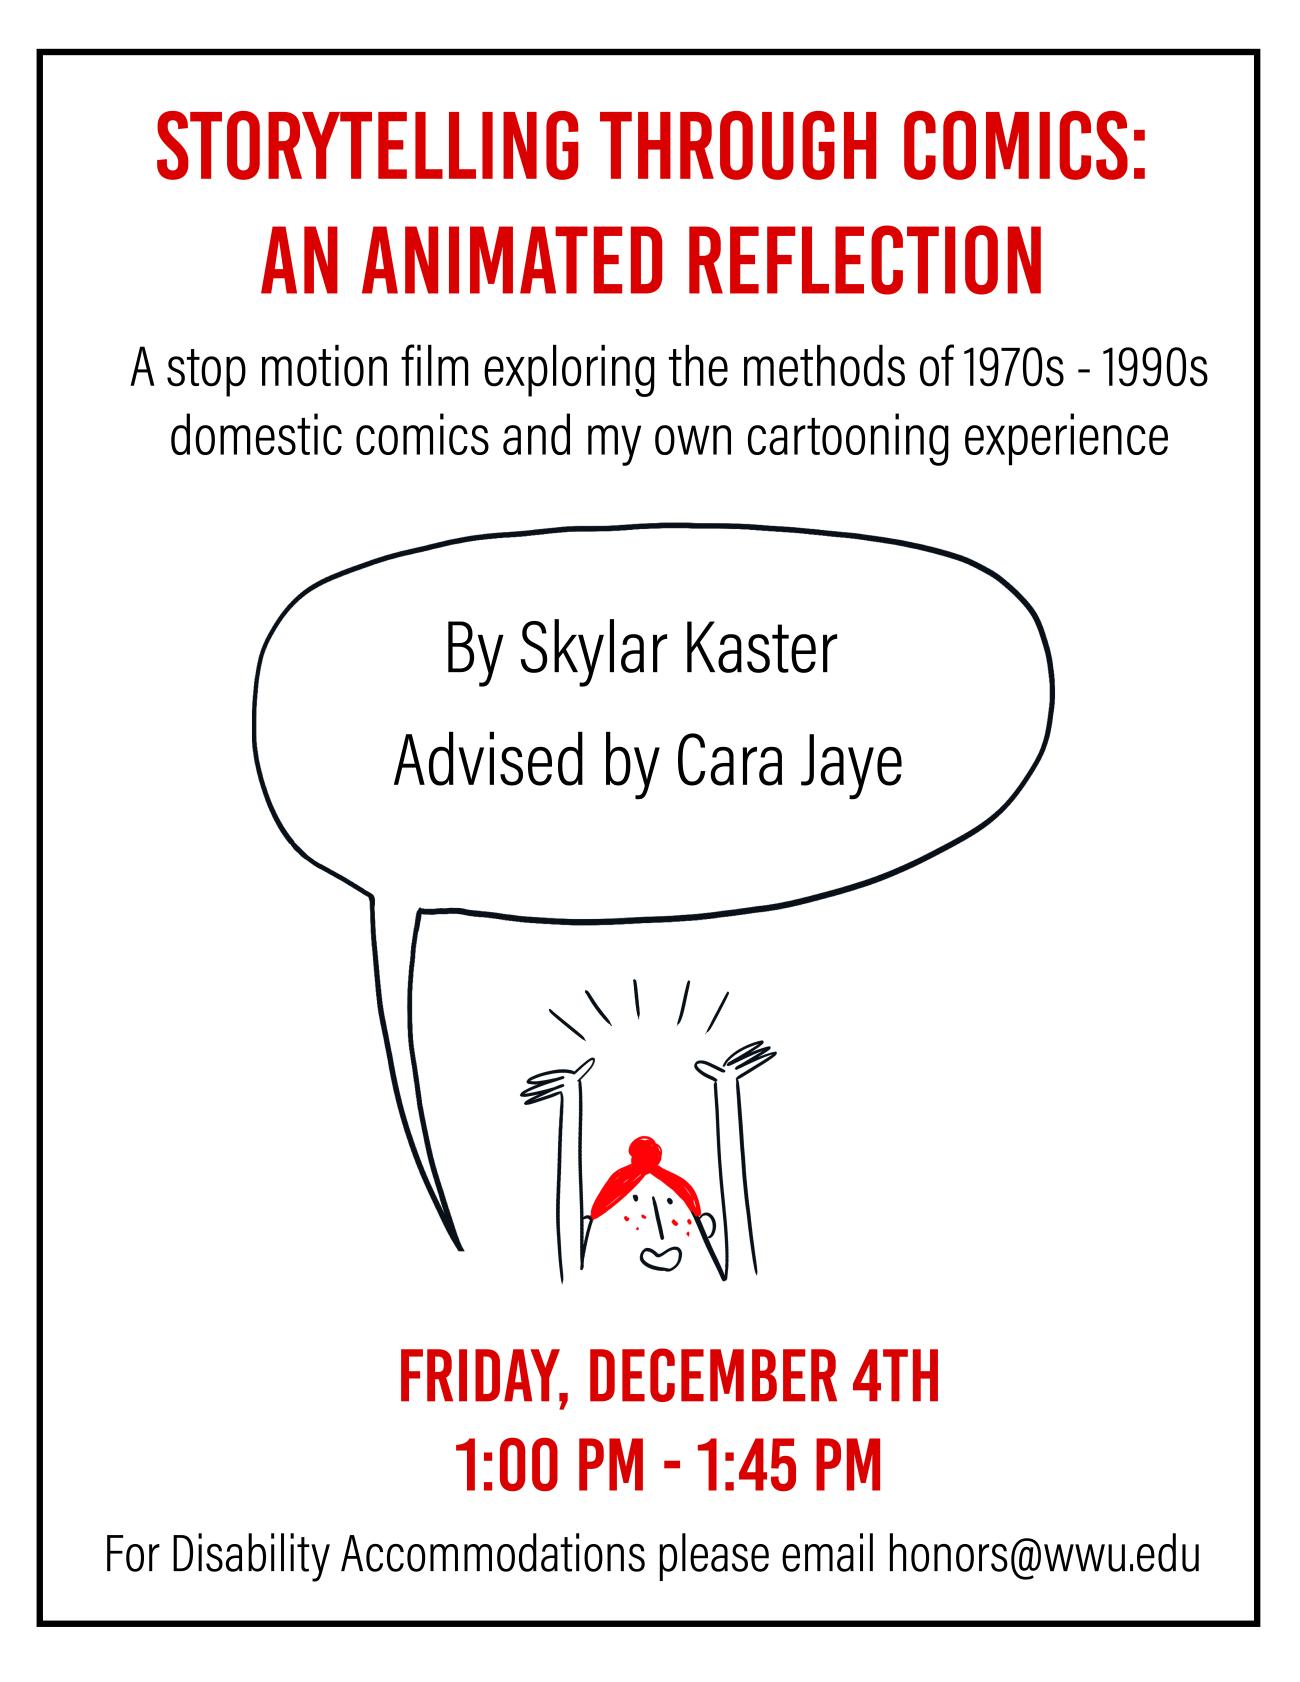 Text: “Storytelling Through Comics: An Animated Reflection. A stop motion film exploring the methods of 1970s-1990s domestic comics and my own cartooning experience. By Skylar Kaster. Advised by Cara Jaye." The text is in a speech bubble hovering above a small redheaded cartoon character looking excited, with her hands in the air and emphasis lines above her head. Below the character, large red text reads, “Friday December 4th; 1:00 pm-1:45 pm. For Disability Accommodations please email ​honors@wwu.edu​.”